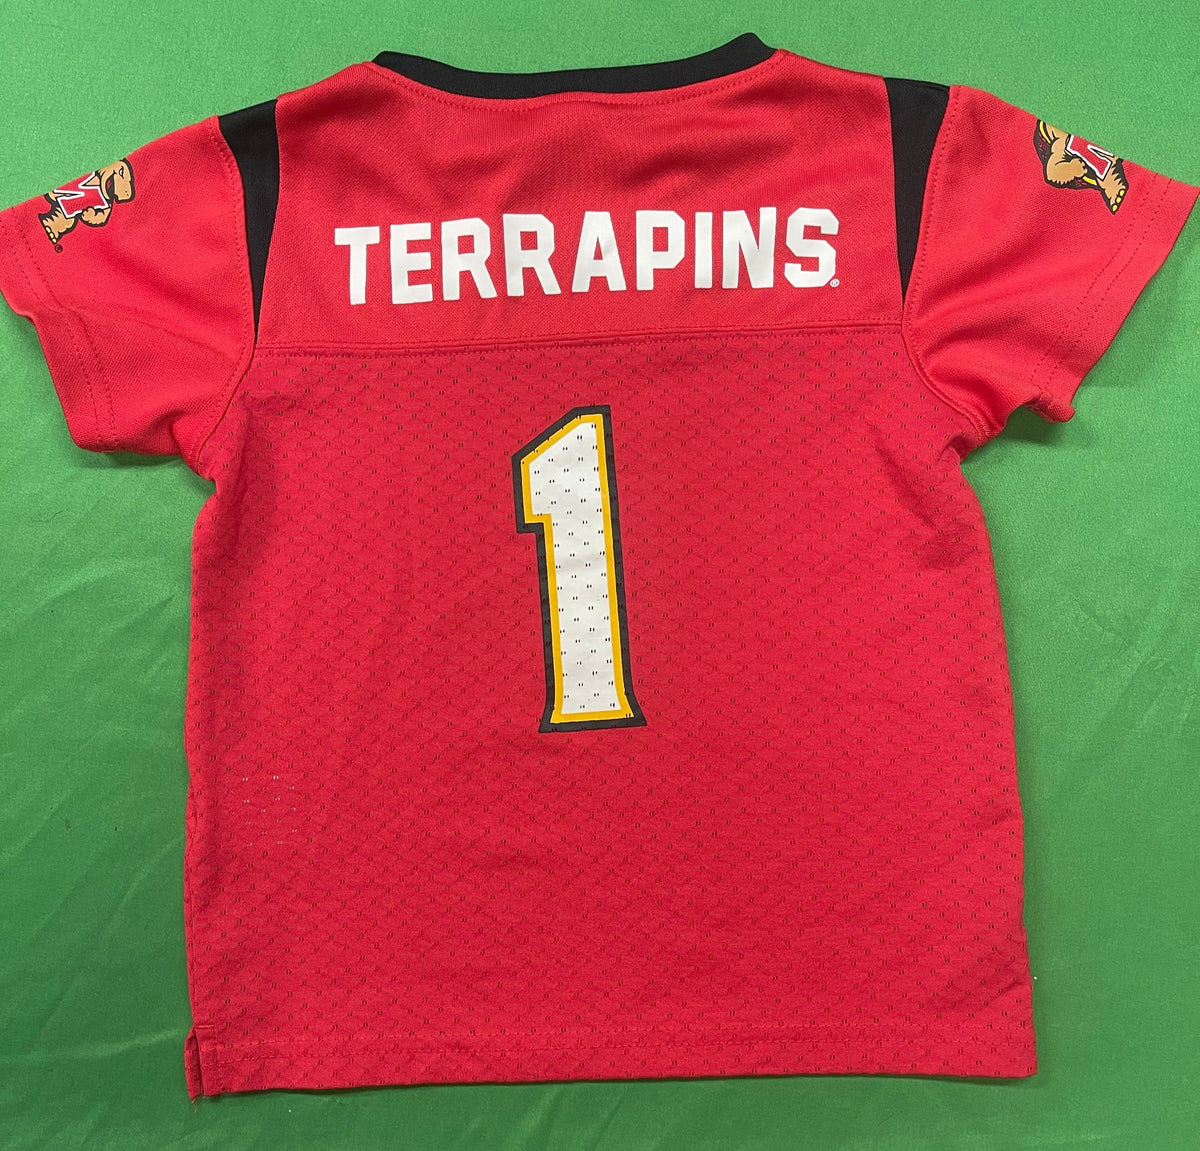 NCAA Maryland Terrapins #1 Red Jersey Toddler 4T